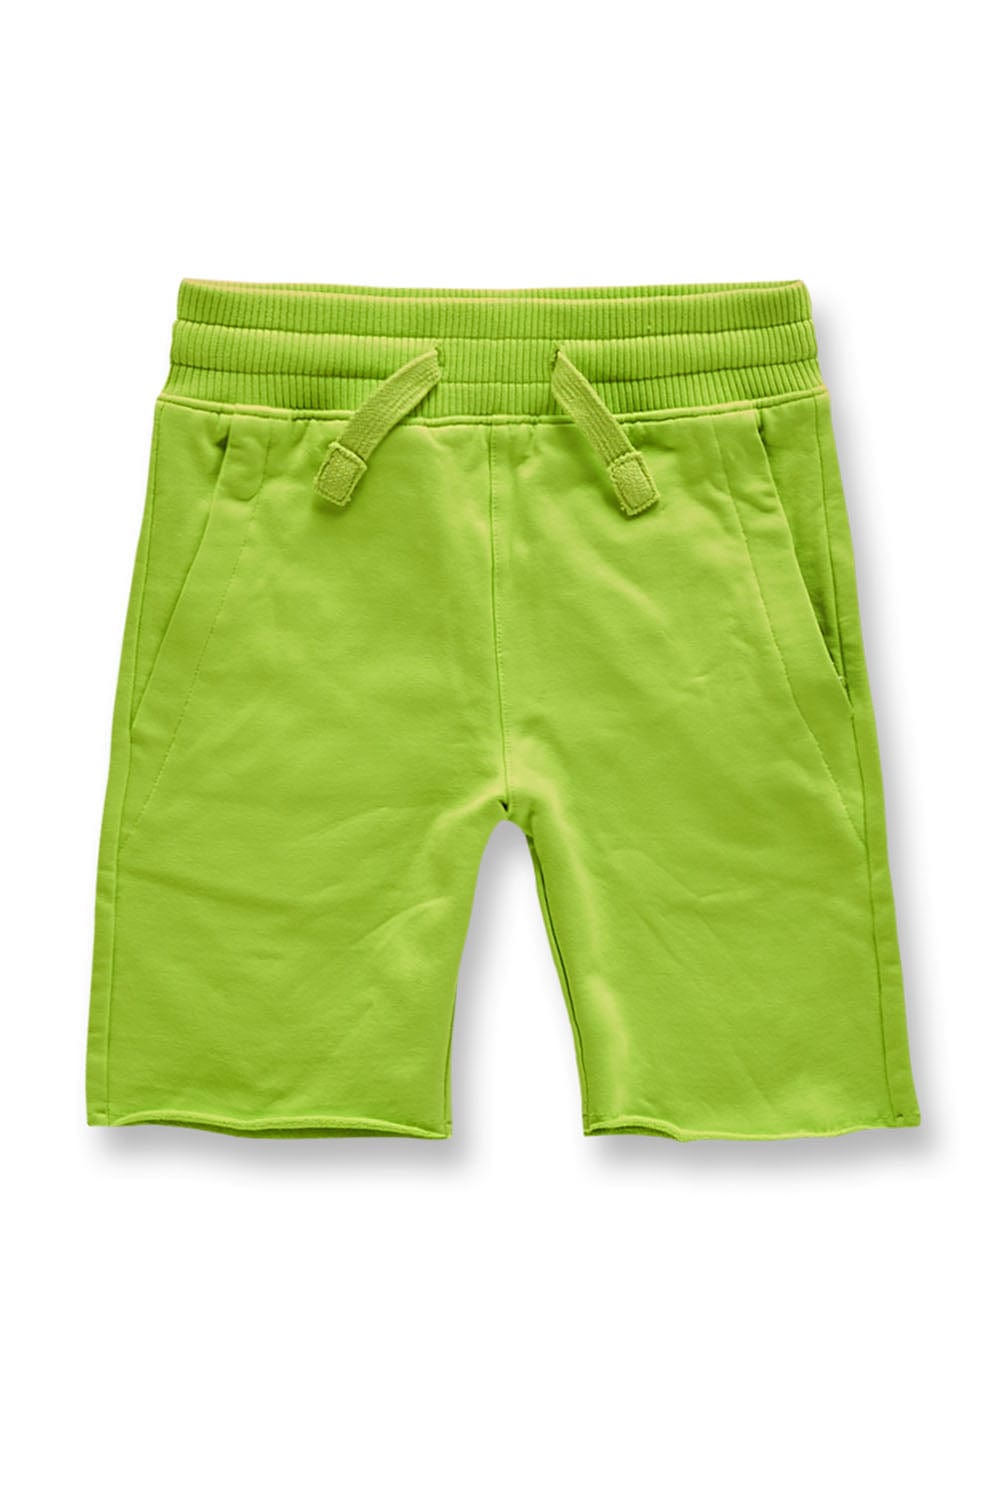 JC Kids Kids Palma French Terry Shorts (Exclusive) (Memorial Day Markdown) Volt / 2